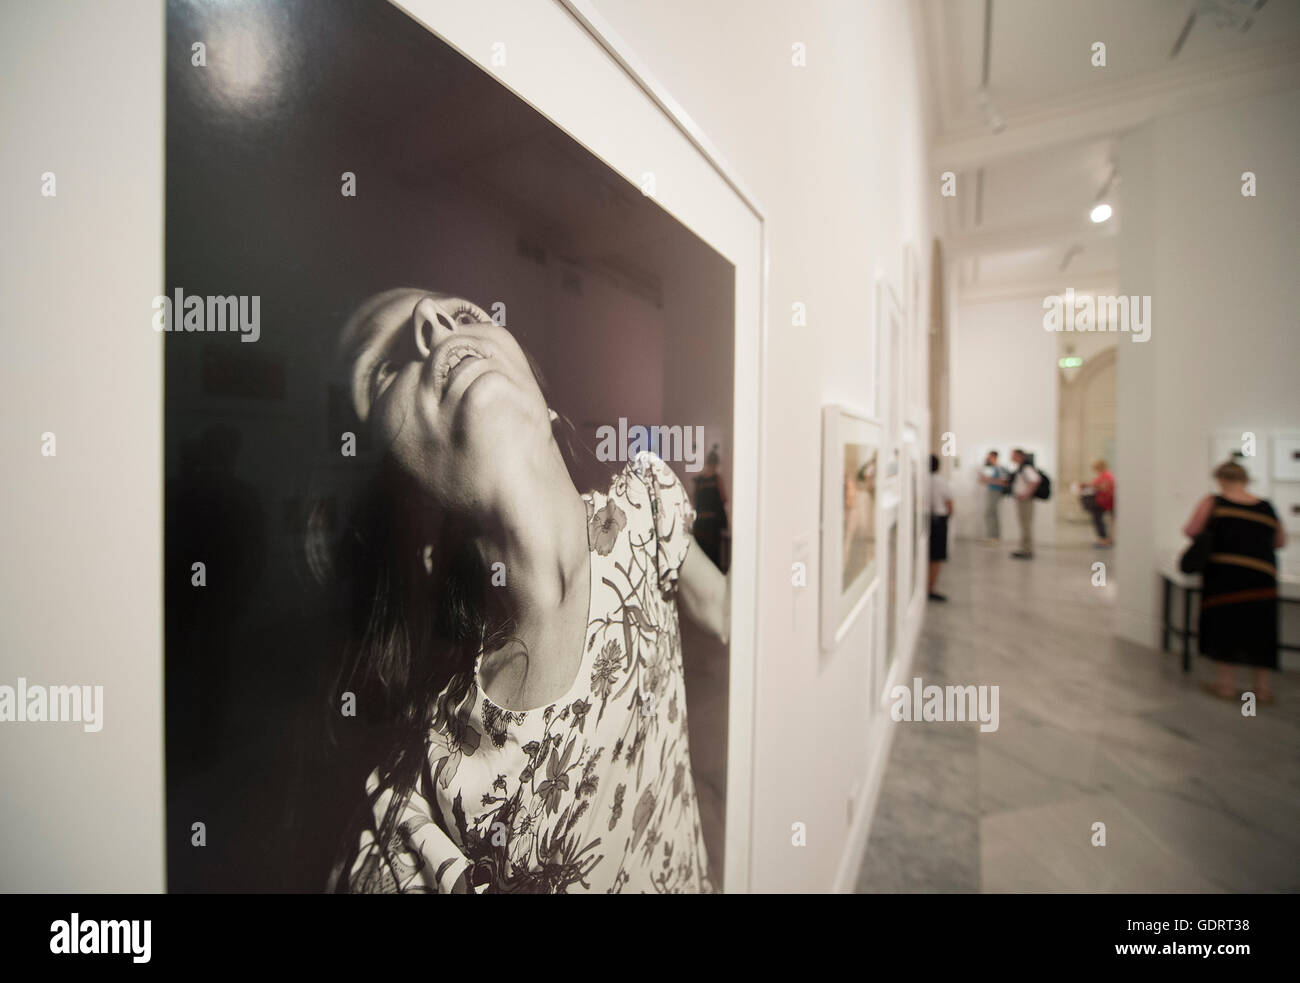 National Portrait Gallery London, UK. 20th July 2016. William Eggleston Portraits. Over 100 works by pioneering American photographer William Eggleston go on display spanning his career from the 1960s to the present day. The exhibition opens to the public from 21 July - 23 October. Credit: Malcolm Park/Alamy Live News. Stock Photo